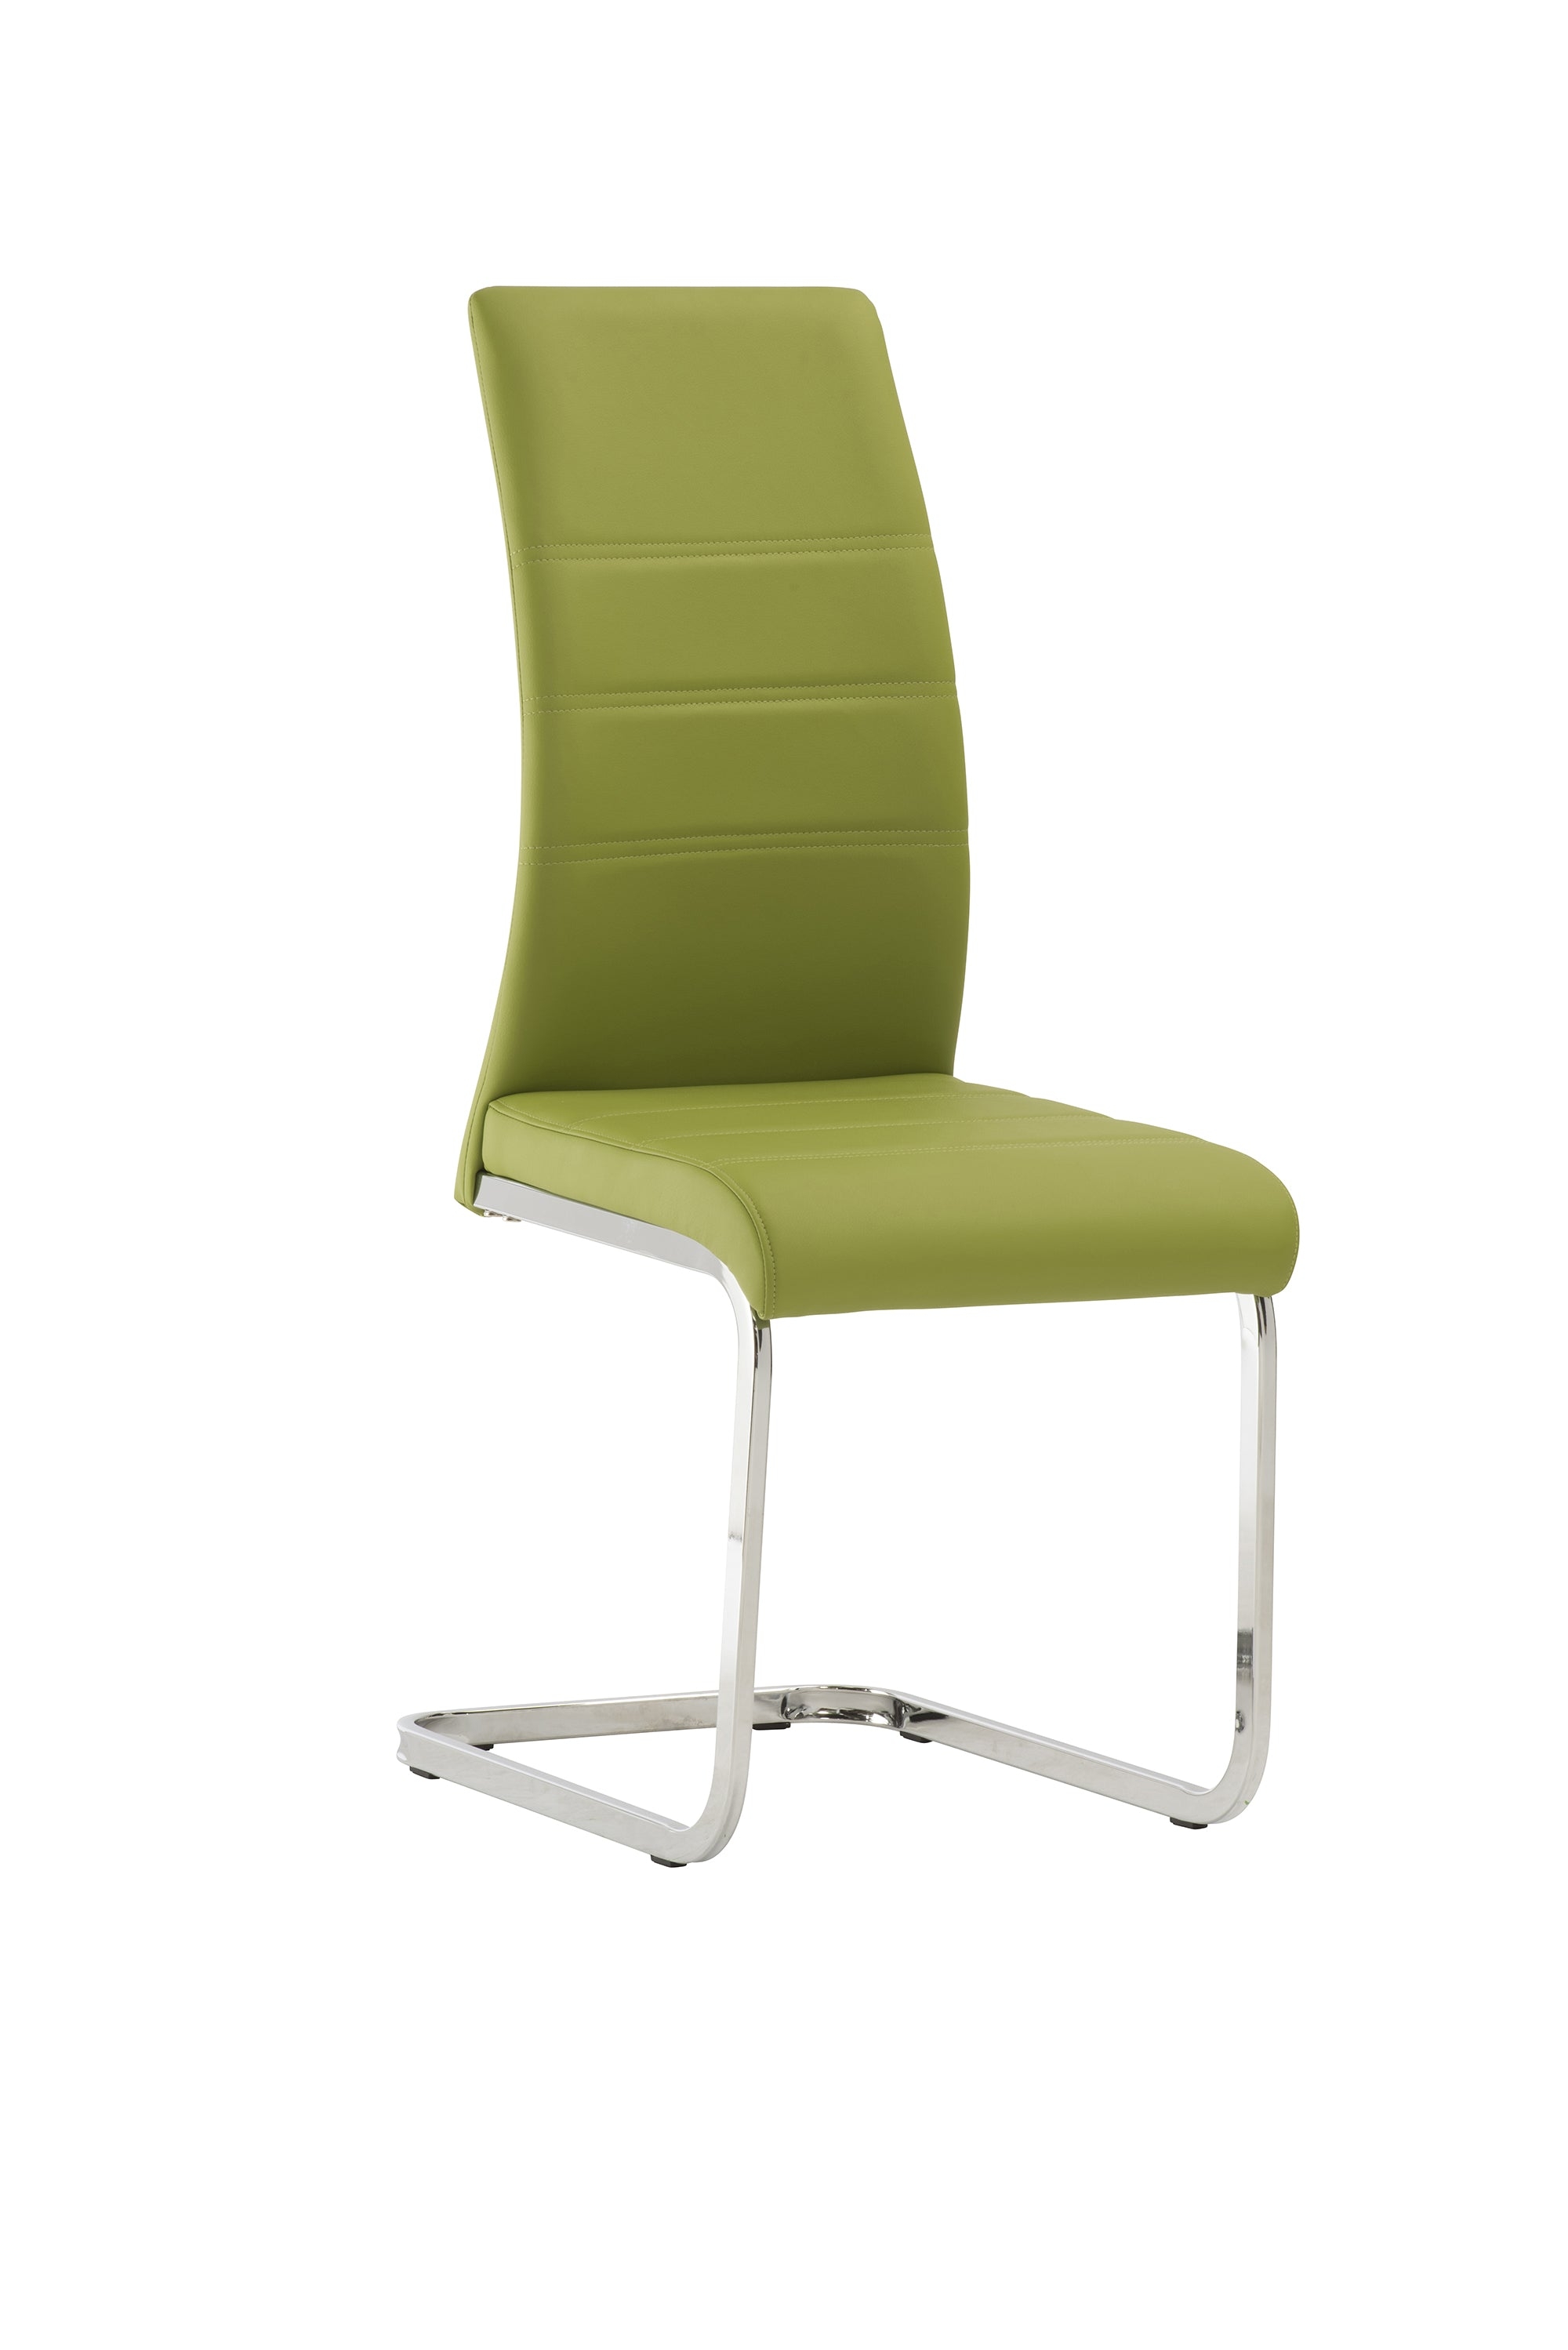 Soho Pu Cantilever Chairs (Pairs), Green – Lc Living